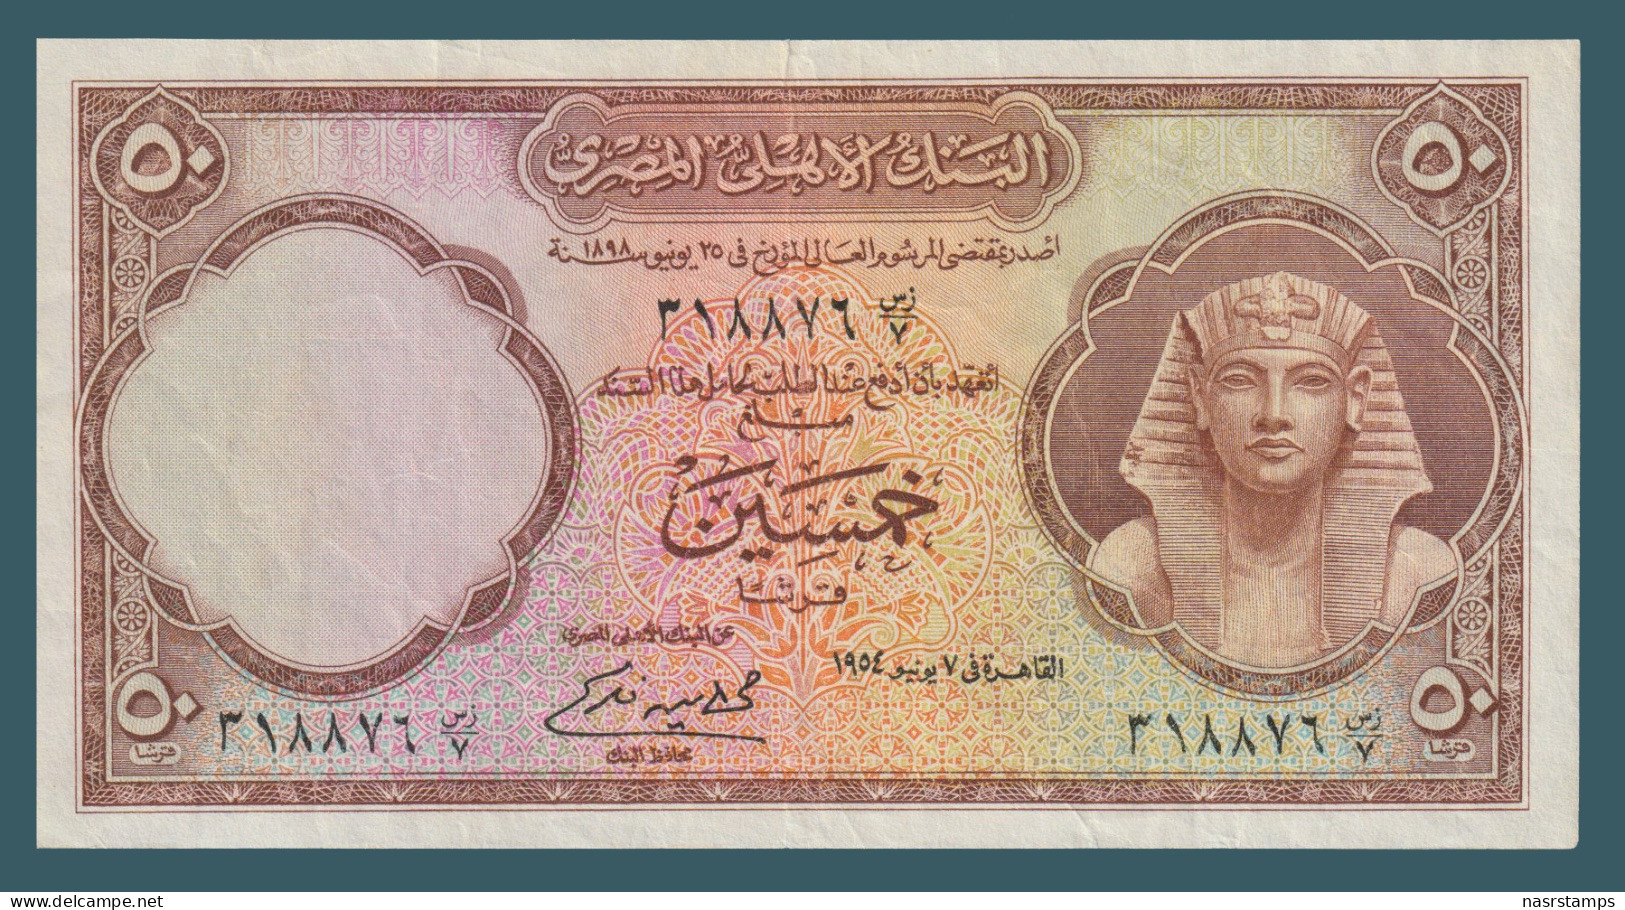 Egypt - 1954 - ( 50 Piasters - Pick-29 - Sign #8 - Fekry ) - VF+ - As Scan - Aegypten